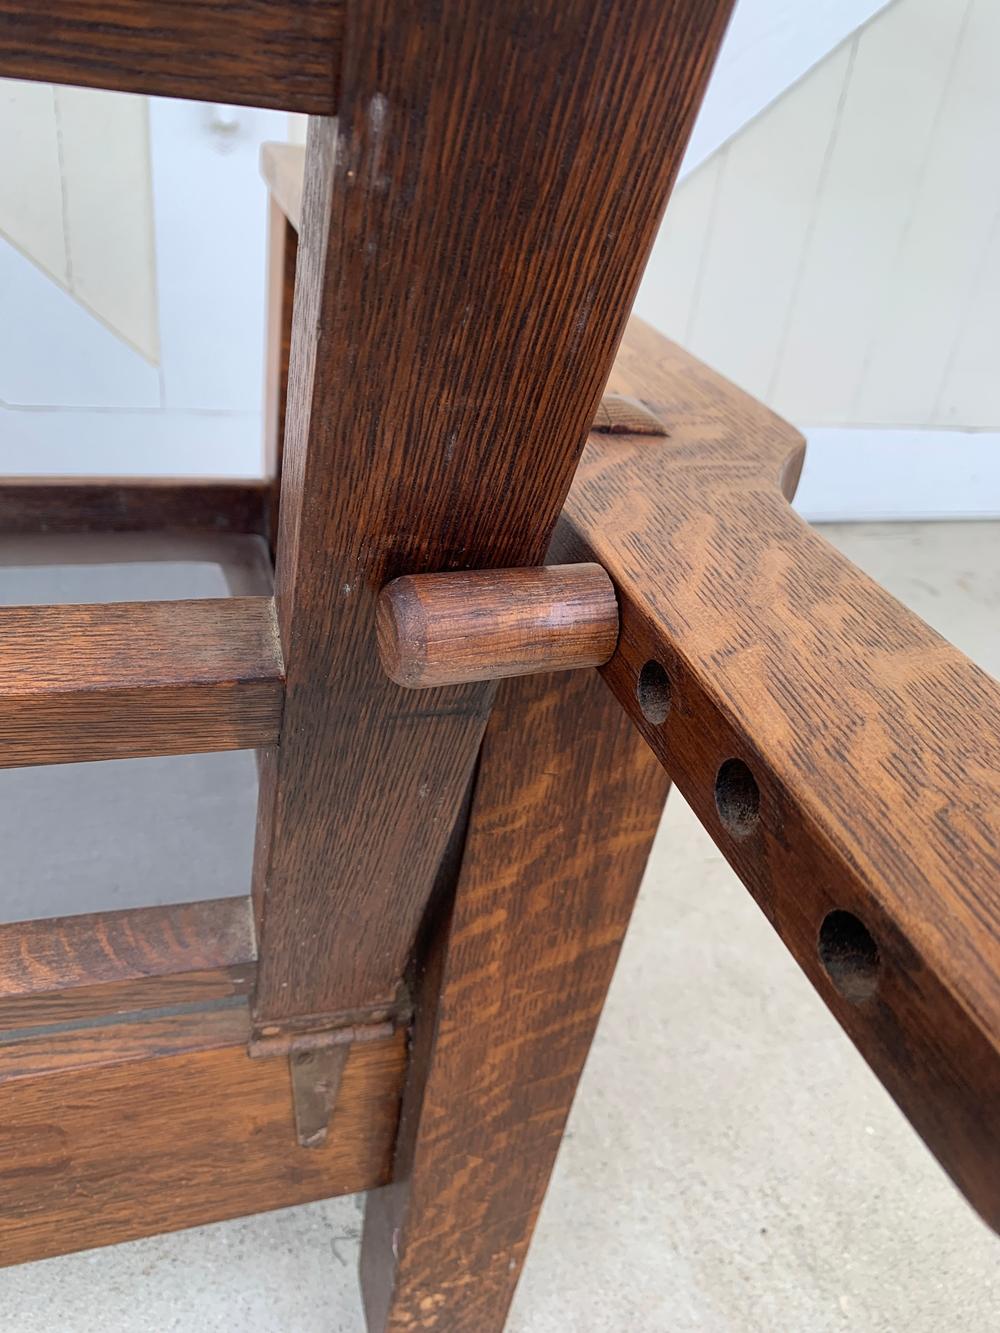 Early 20th Century Plank Oak Chair by J. M. & Sons, Arts & Crafts Period